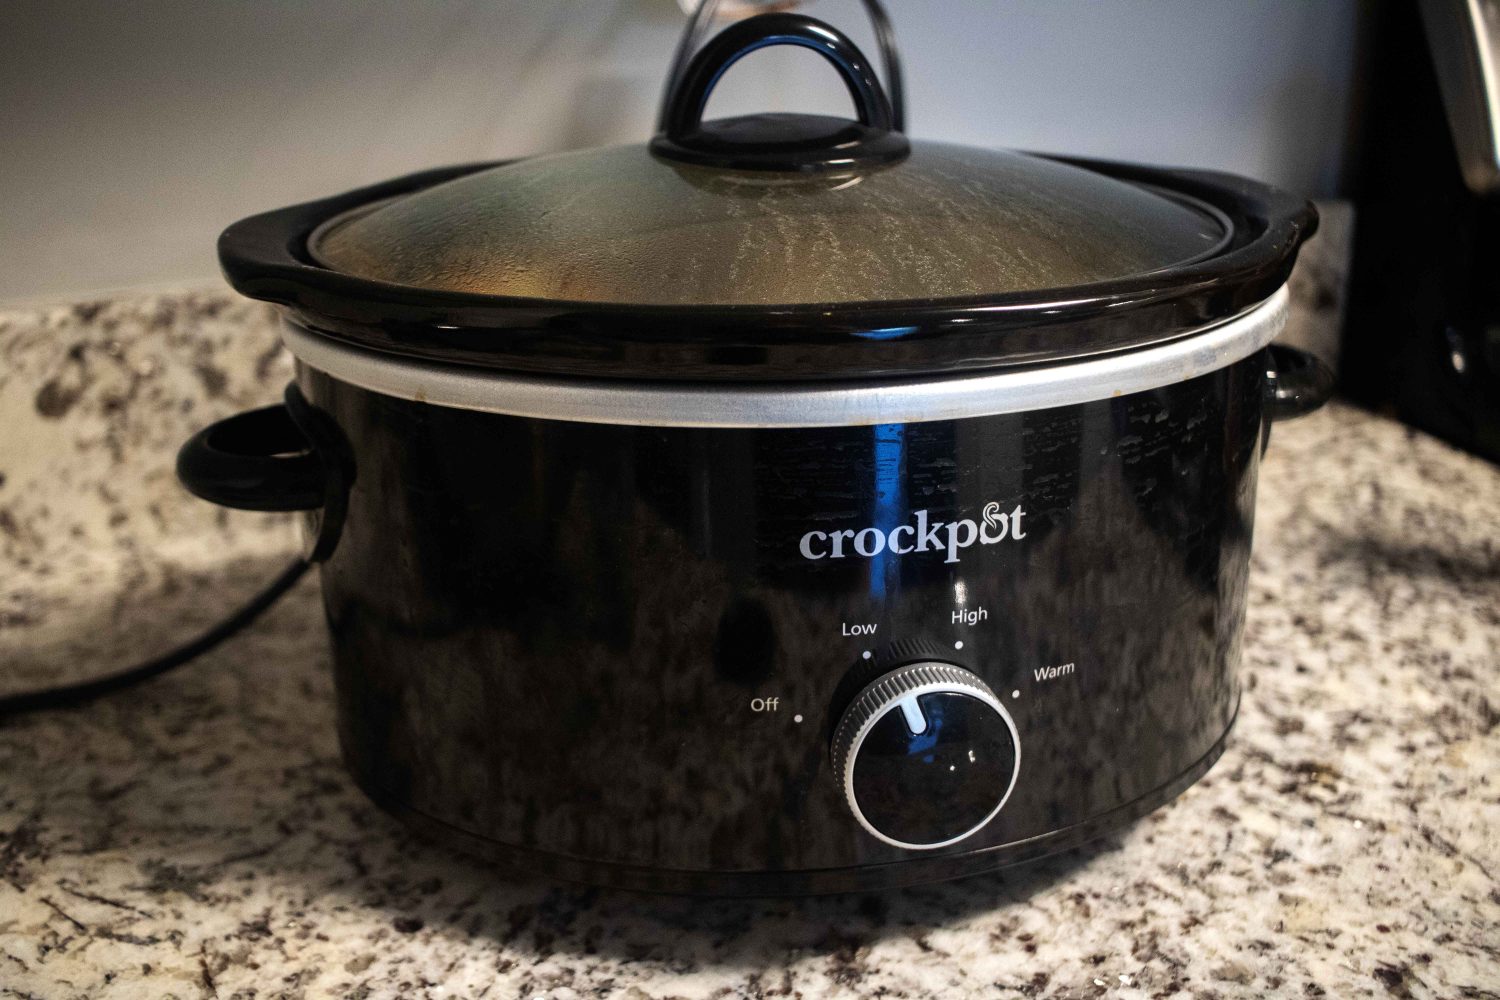 Veggies and meat stewing overnight in a crockpot